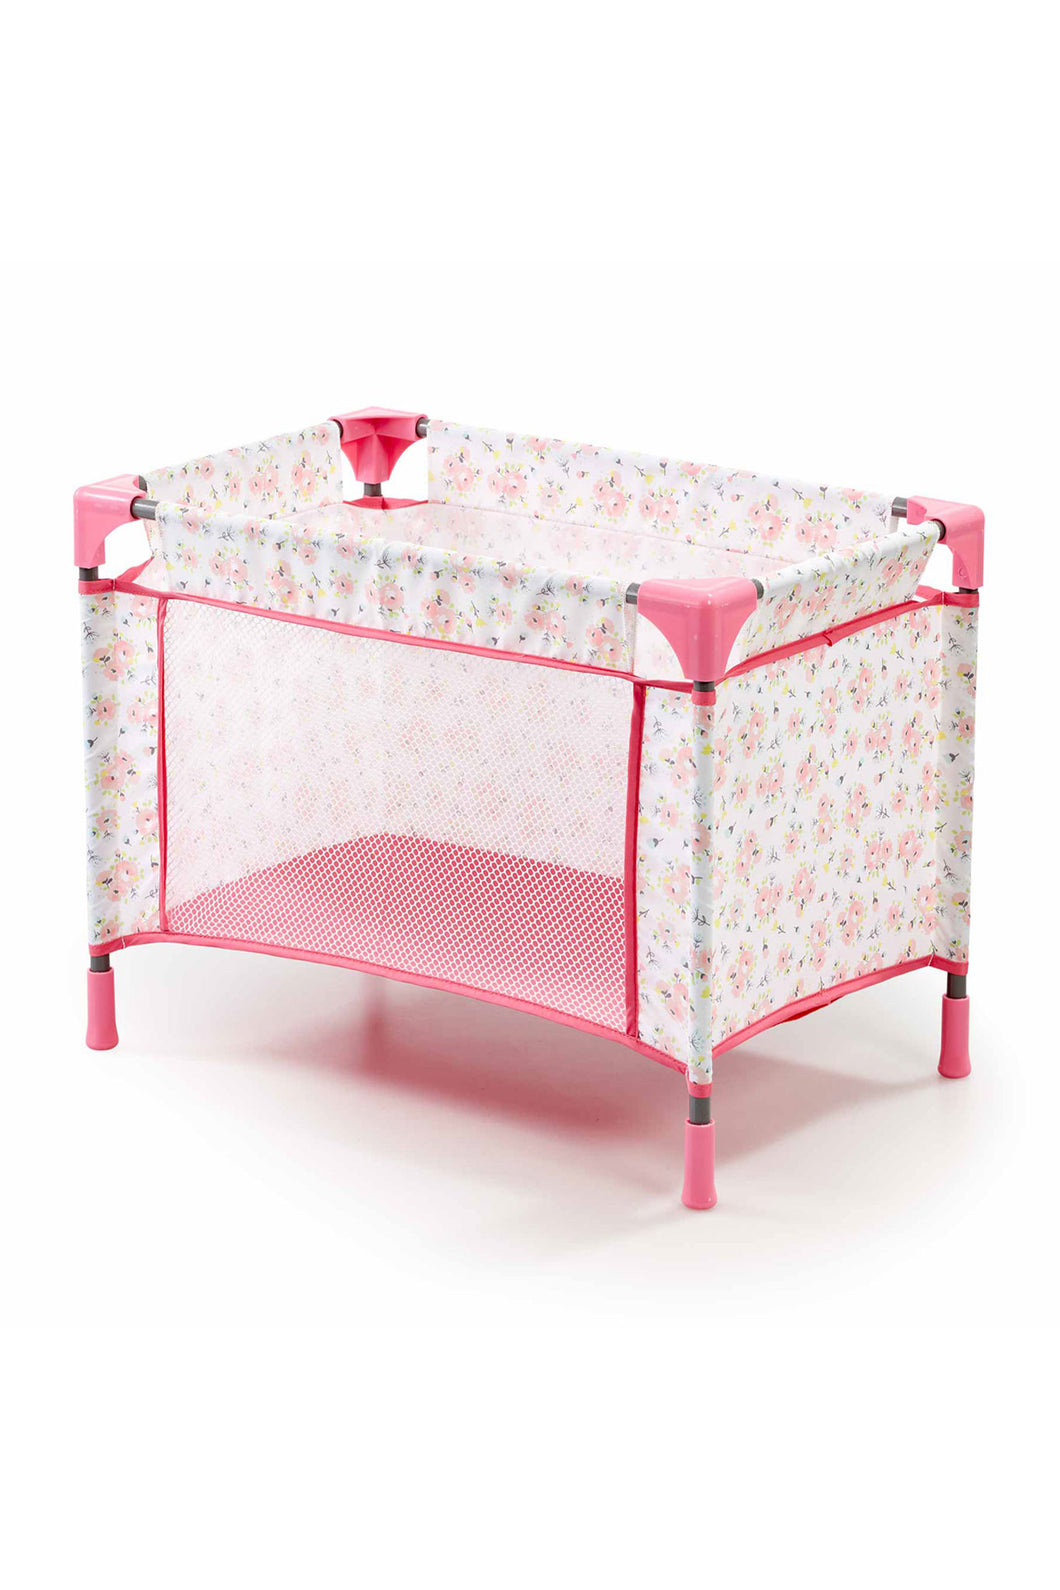 Cupcake Travel Dolly Bed